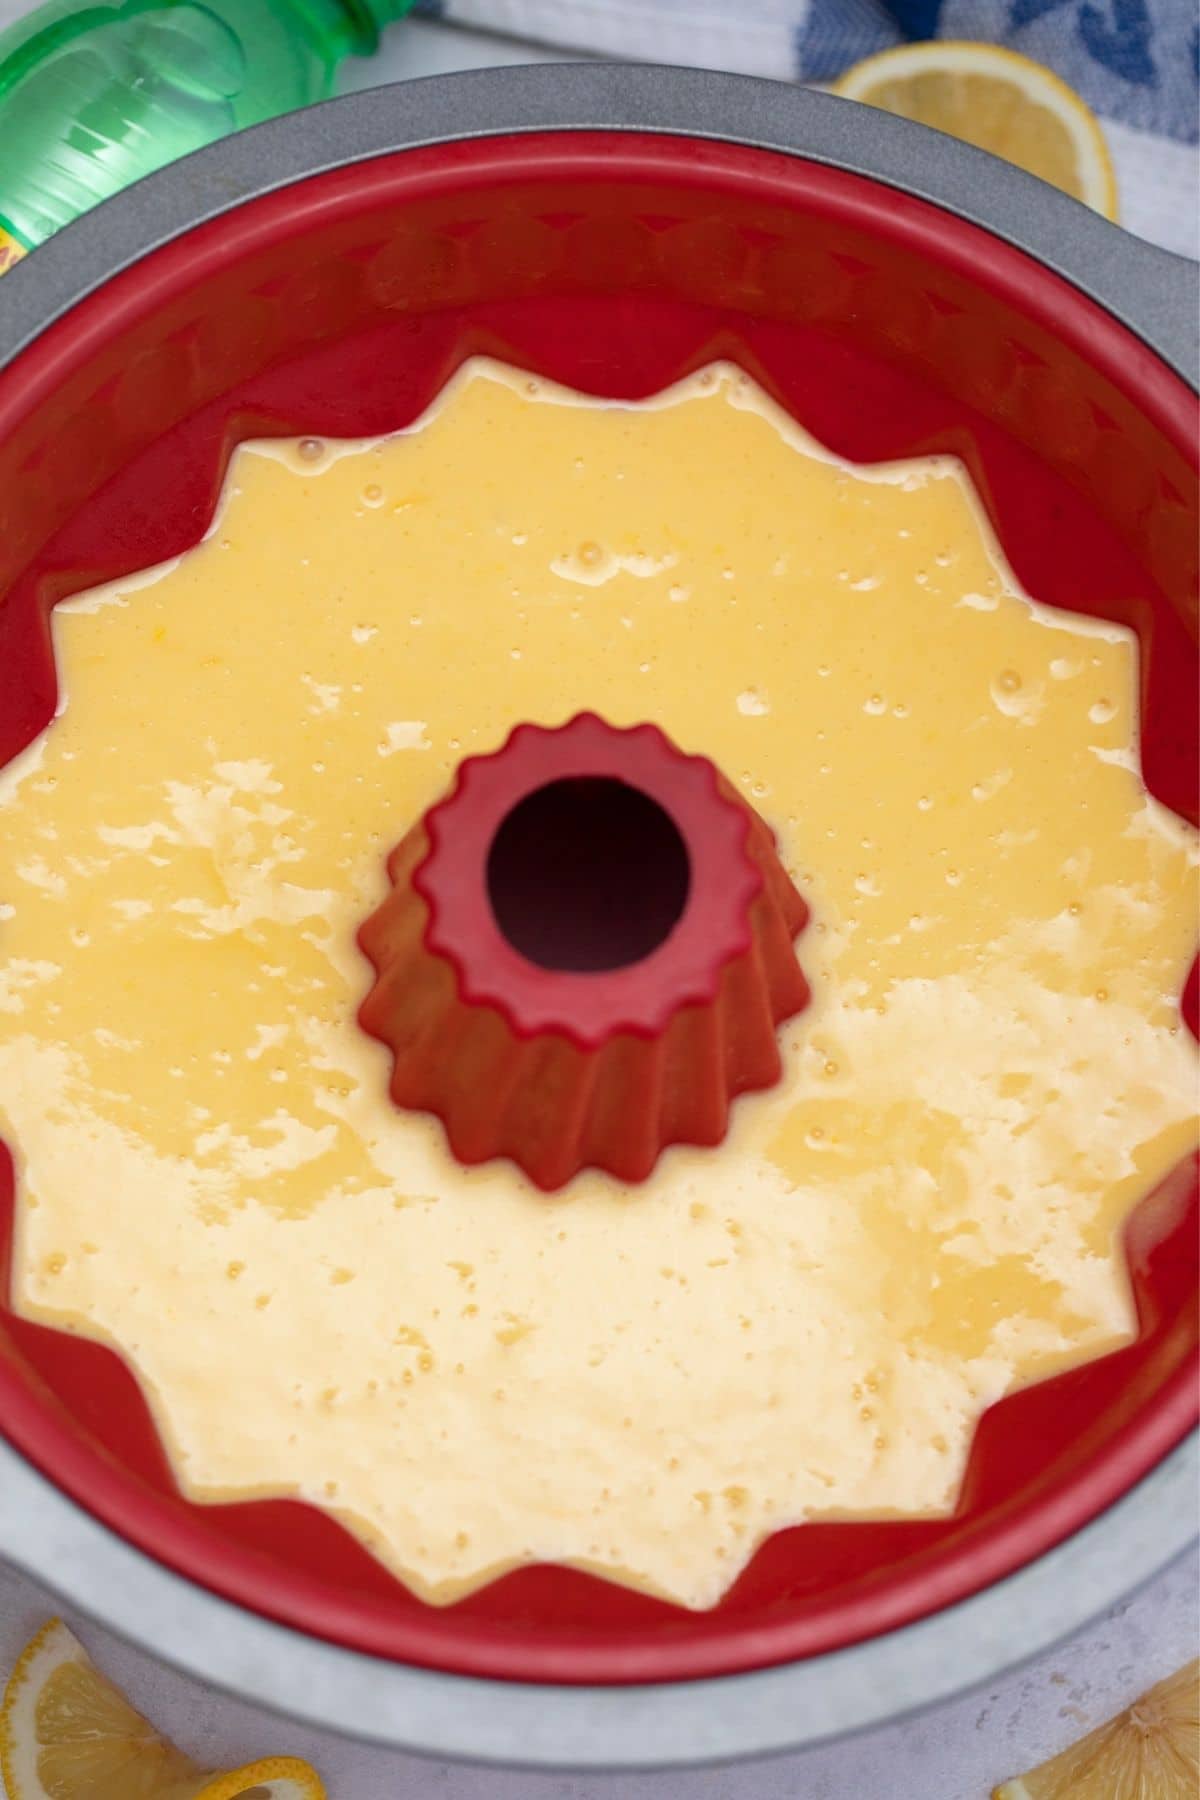 Unbaked cake batter in red budnt pan